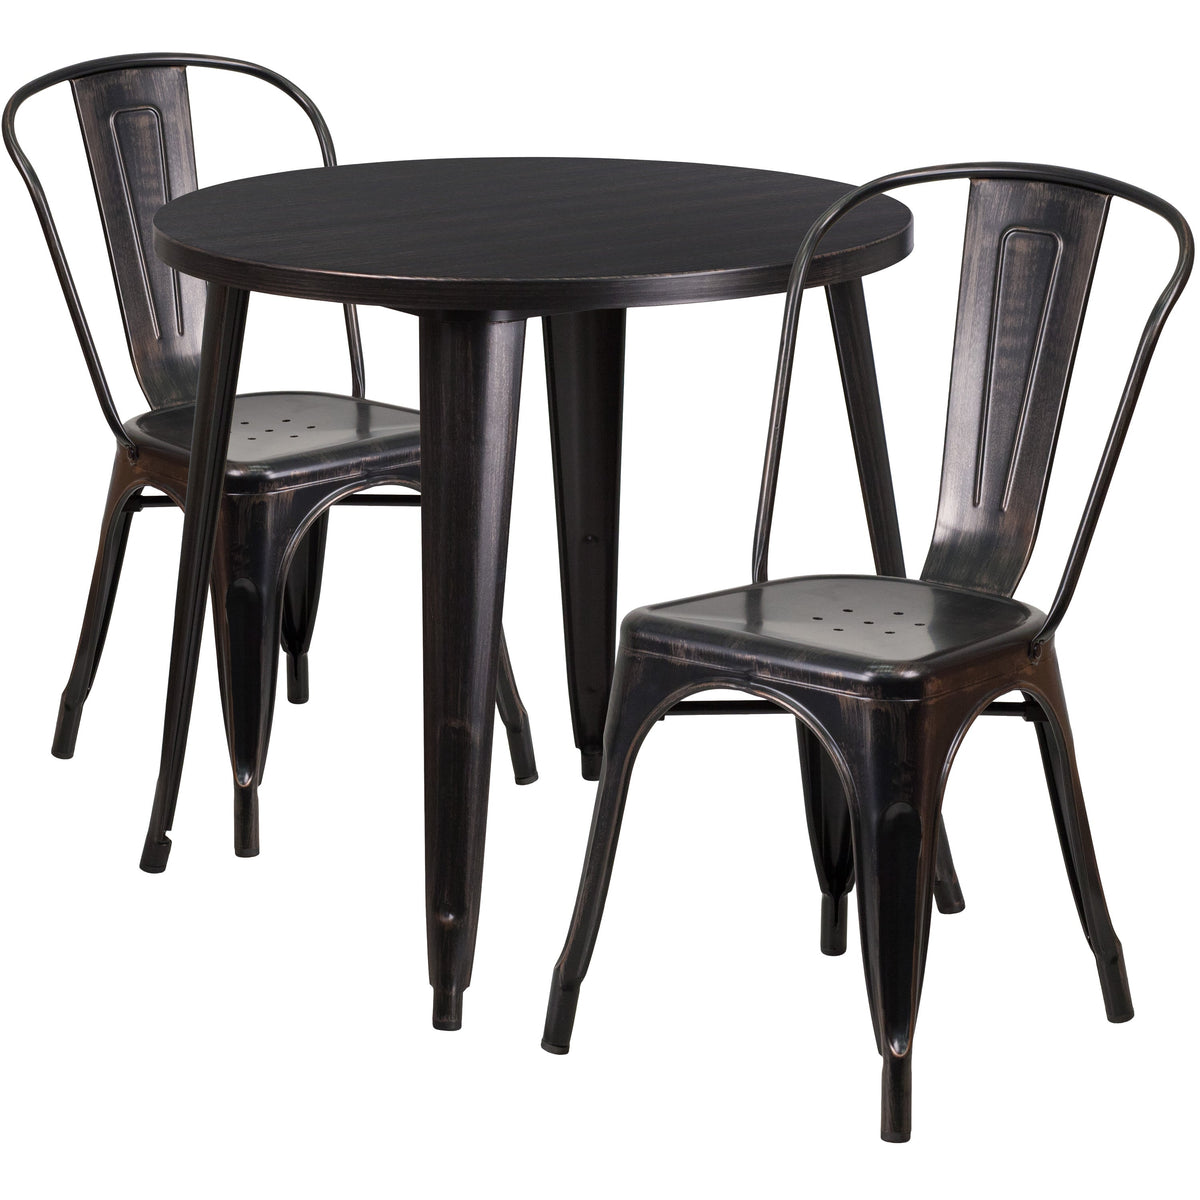 Black-Antique Gold |#| 30inch Round Black-Antique Gold Metal Indoor-Outdoor Table Set with 2 Cafe Chairs